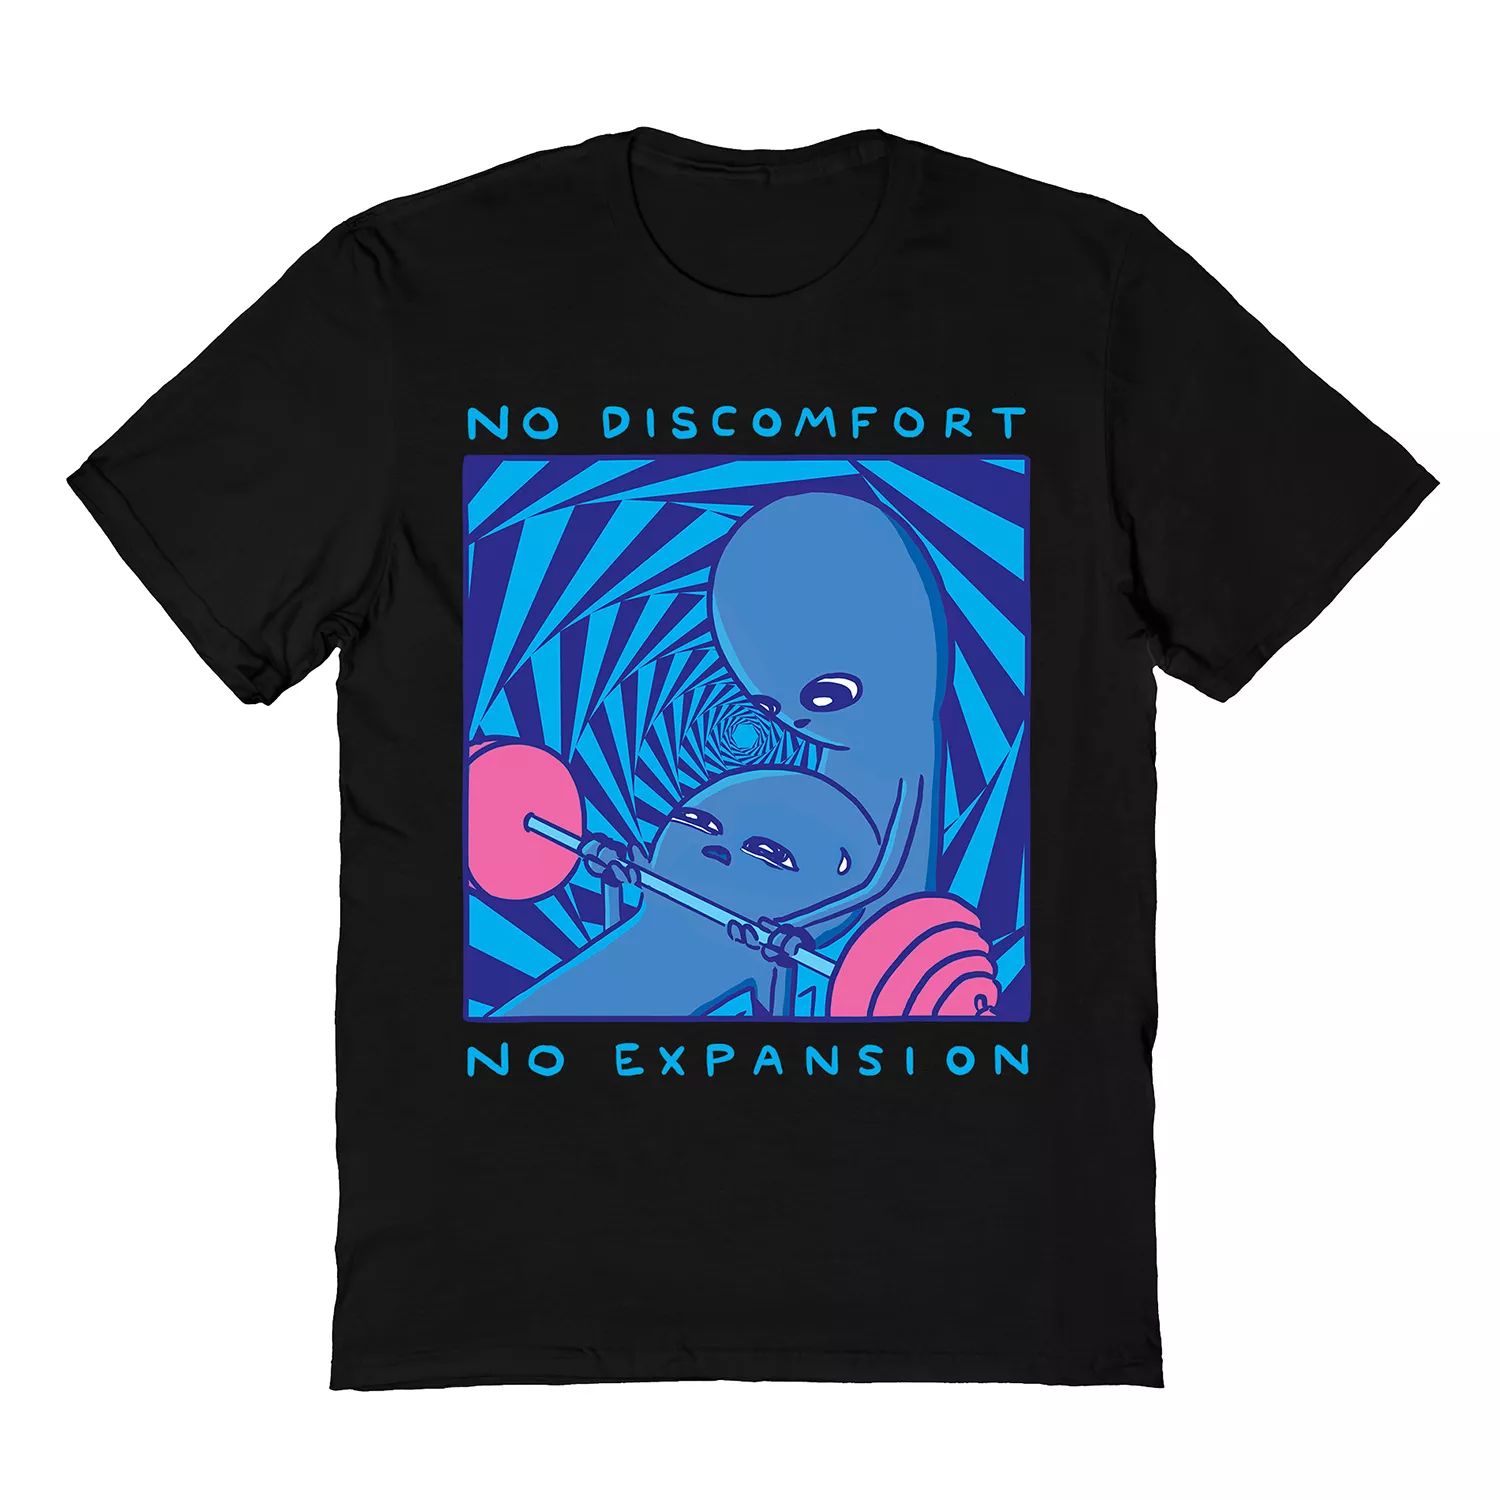 pyle nathan w strange planet the sneaking hiding vibrating creature Мужская футболка Strange Planet от Nathan Pyle No Discomfort No Expansion Tee COLAB89 by Threadless